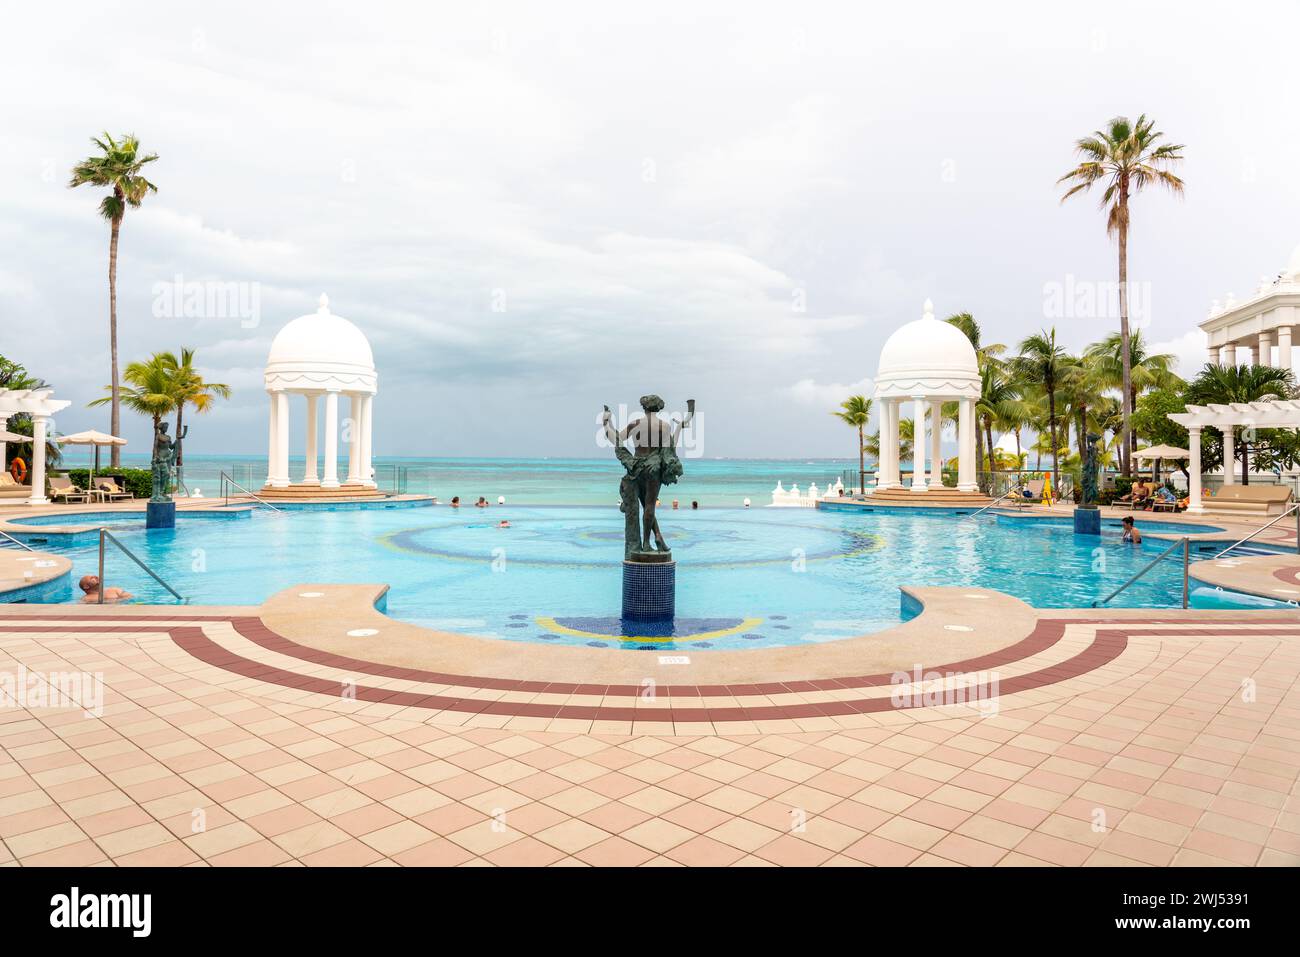 Cancun, Mexico - September 17, 2021: View with pool of beautiful Hotel Riu Palace Las Americas in the hotel zone of Cancun Stock Photo